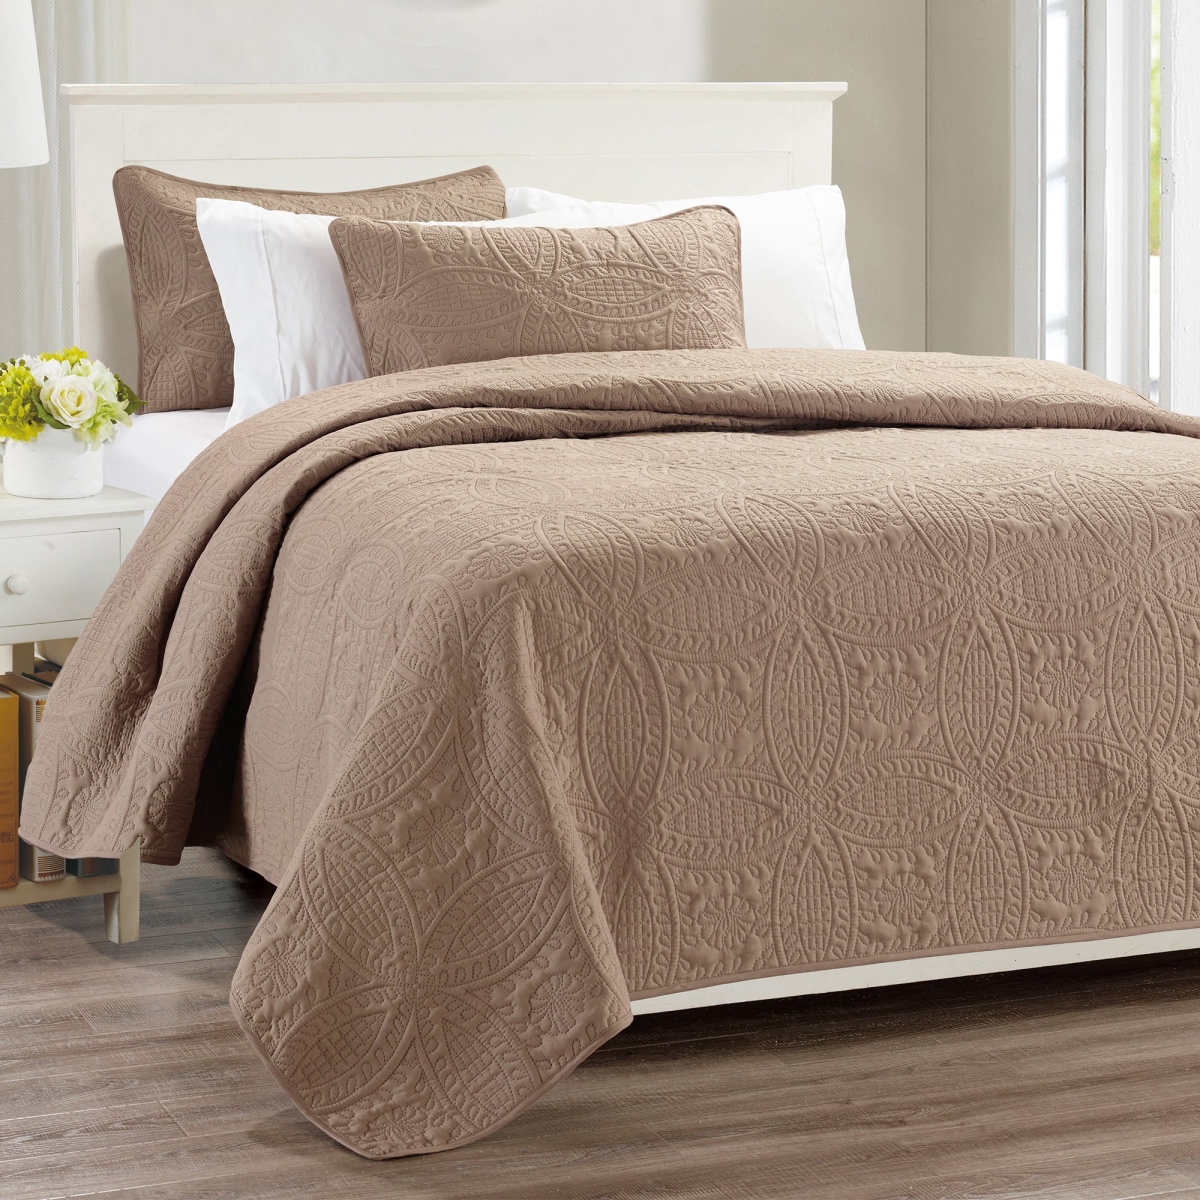 3 Piece Millano Chambrey Quilt Set, Taupe - King Size